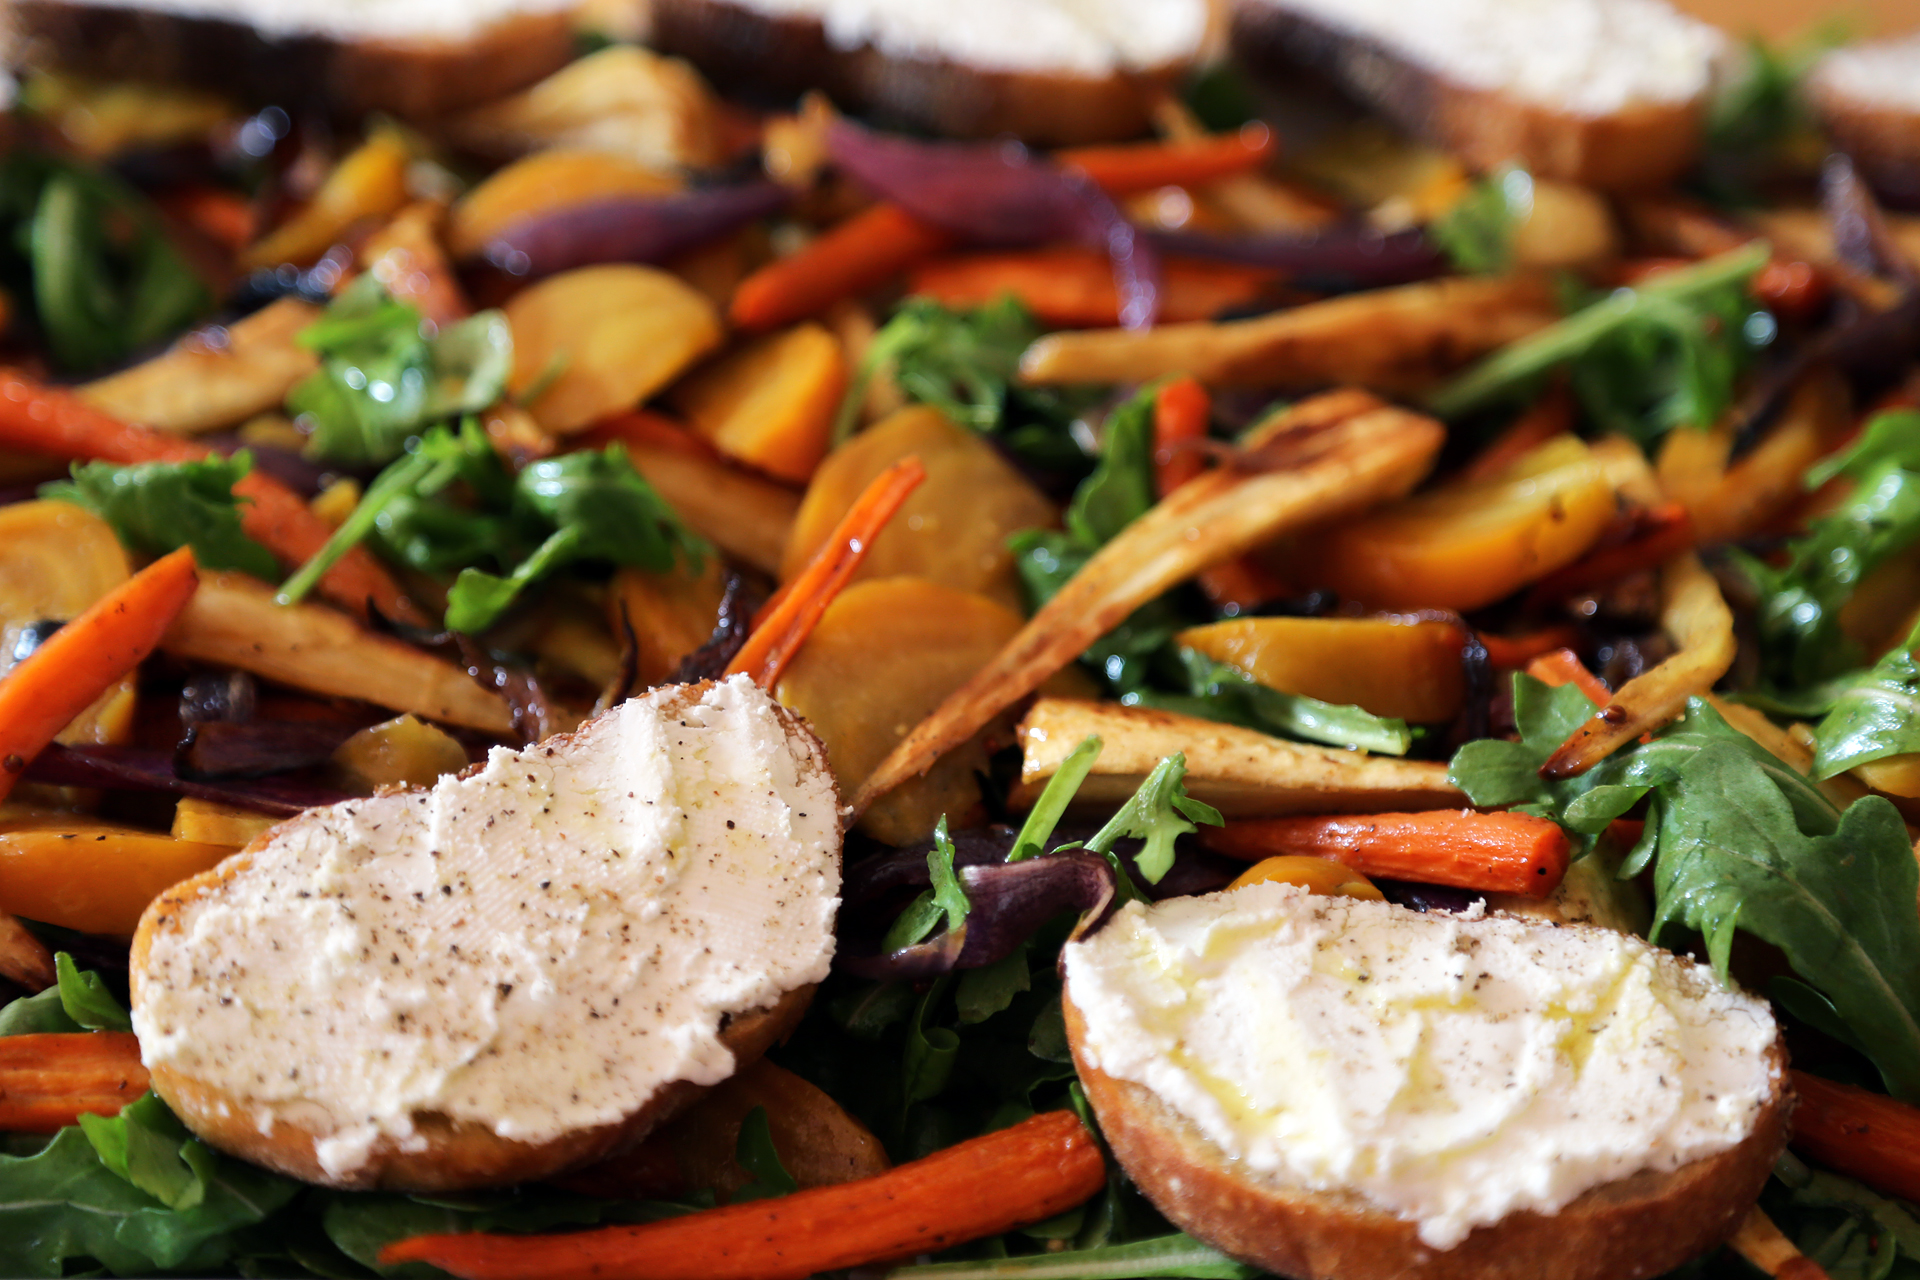 Autumn Root Vegetable Salad with Goat Cheese Crostini